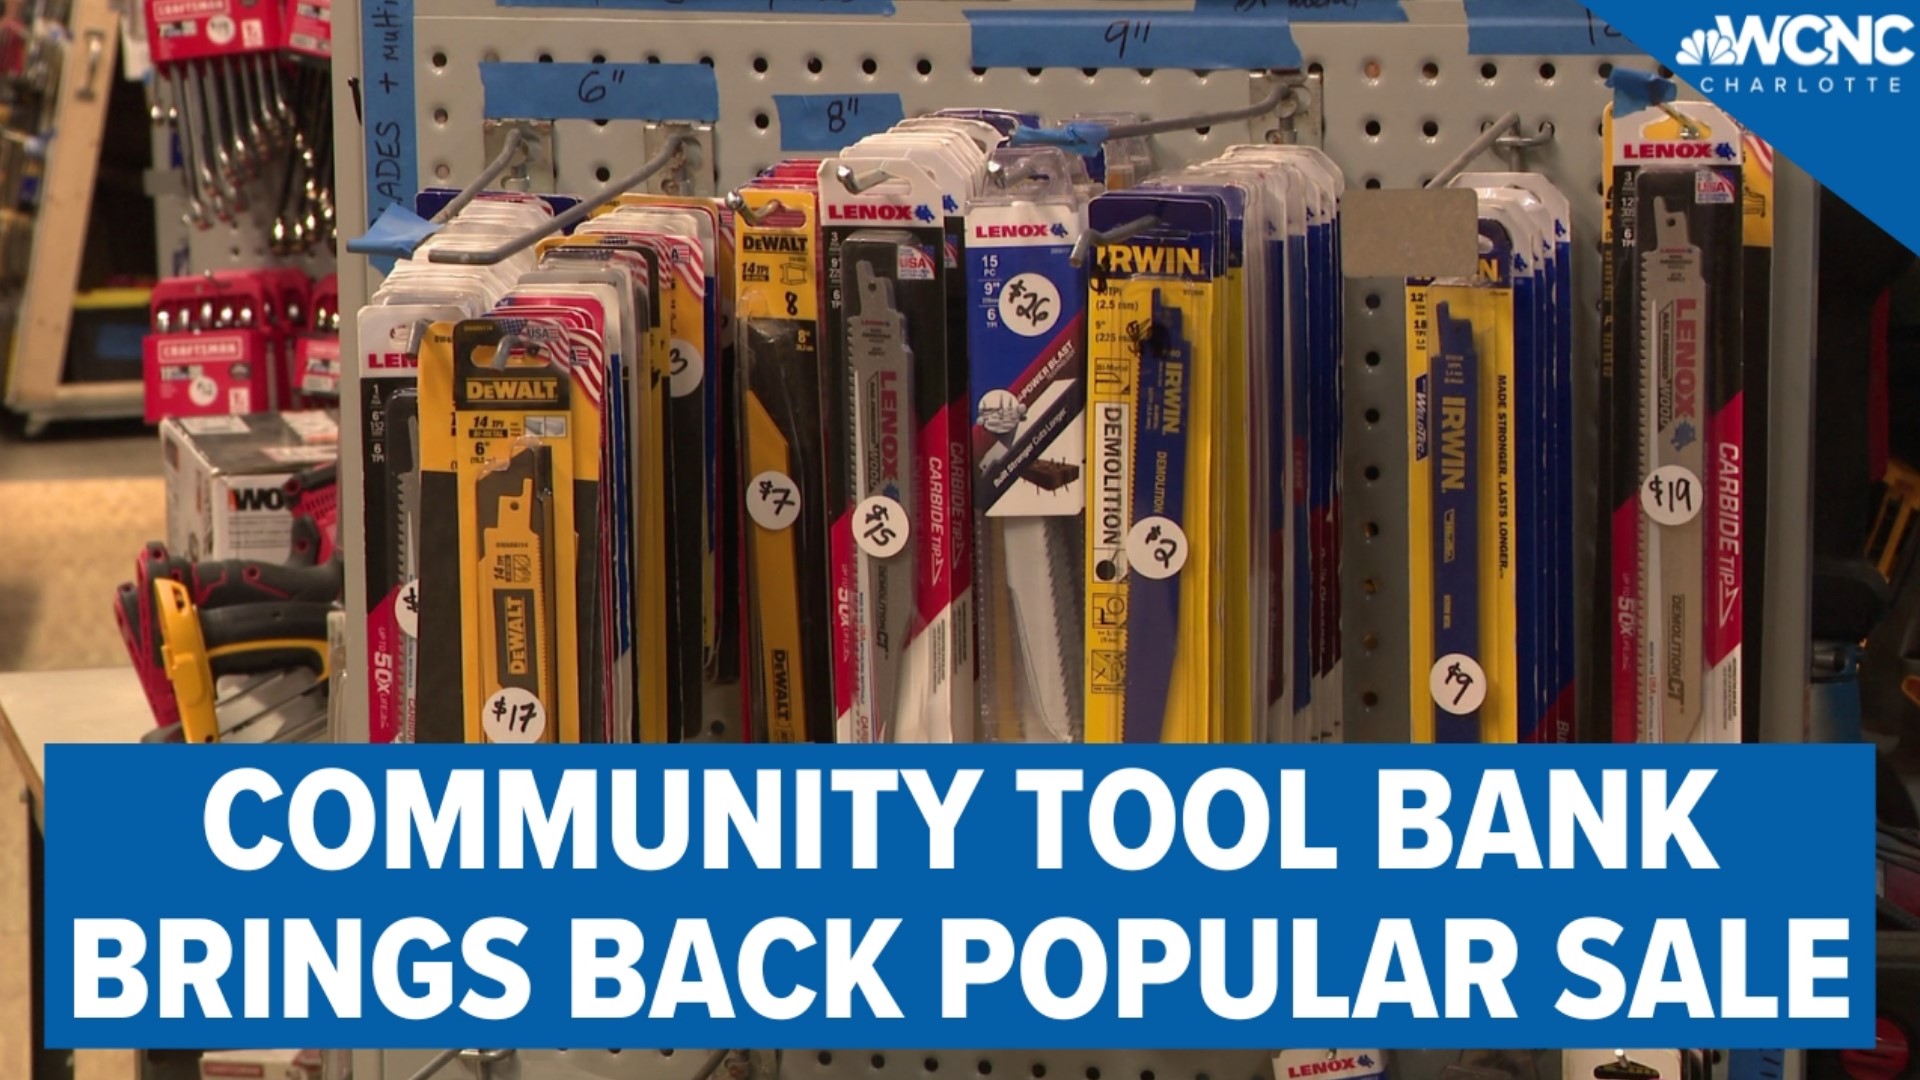 The 'Charlotte Community Tool Bank' is bringing back its popular sale, which was canceled during the pandemic.